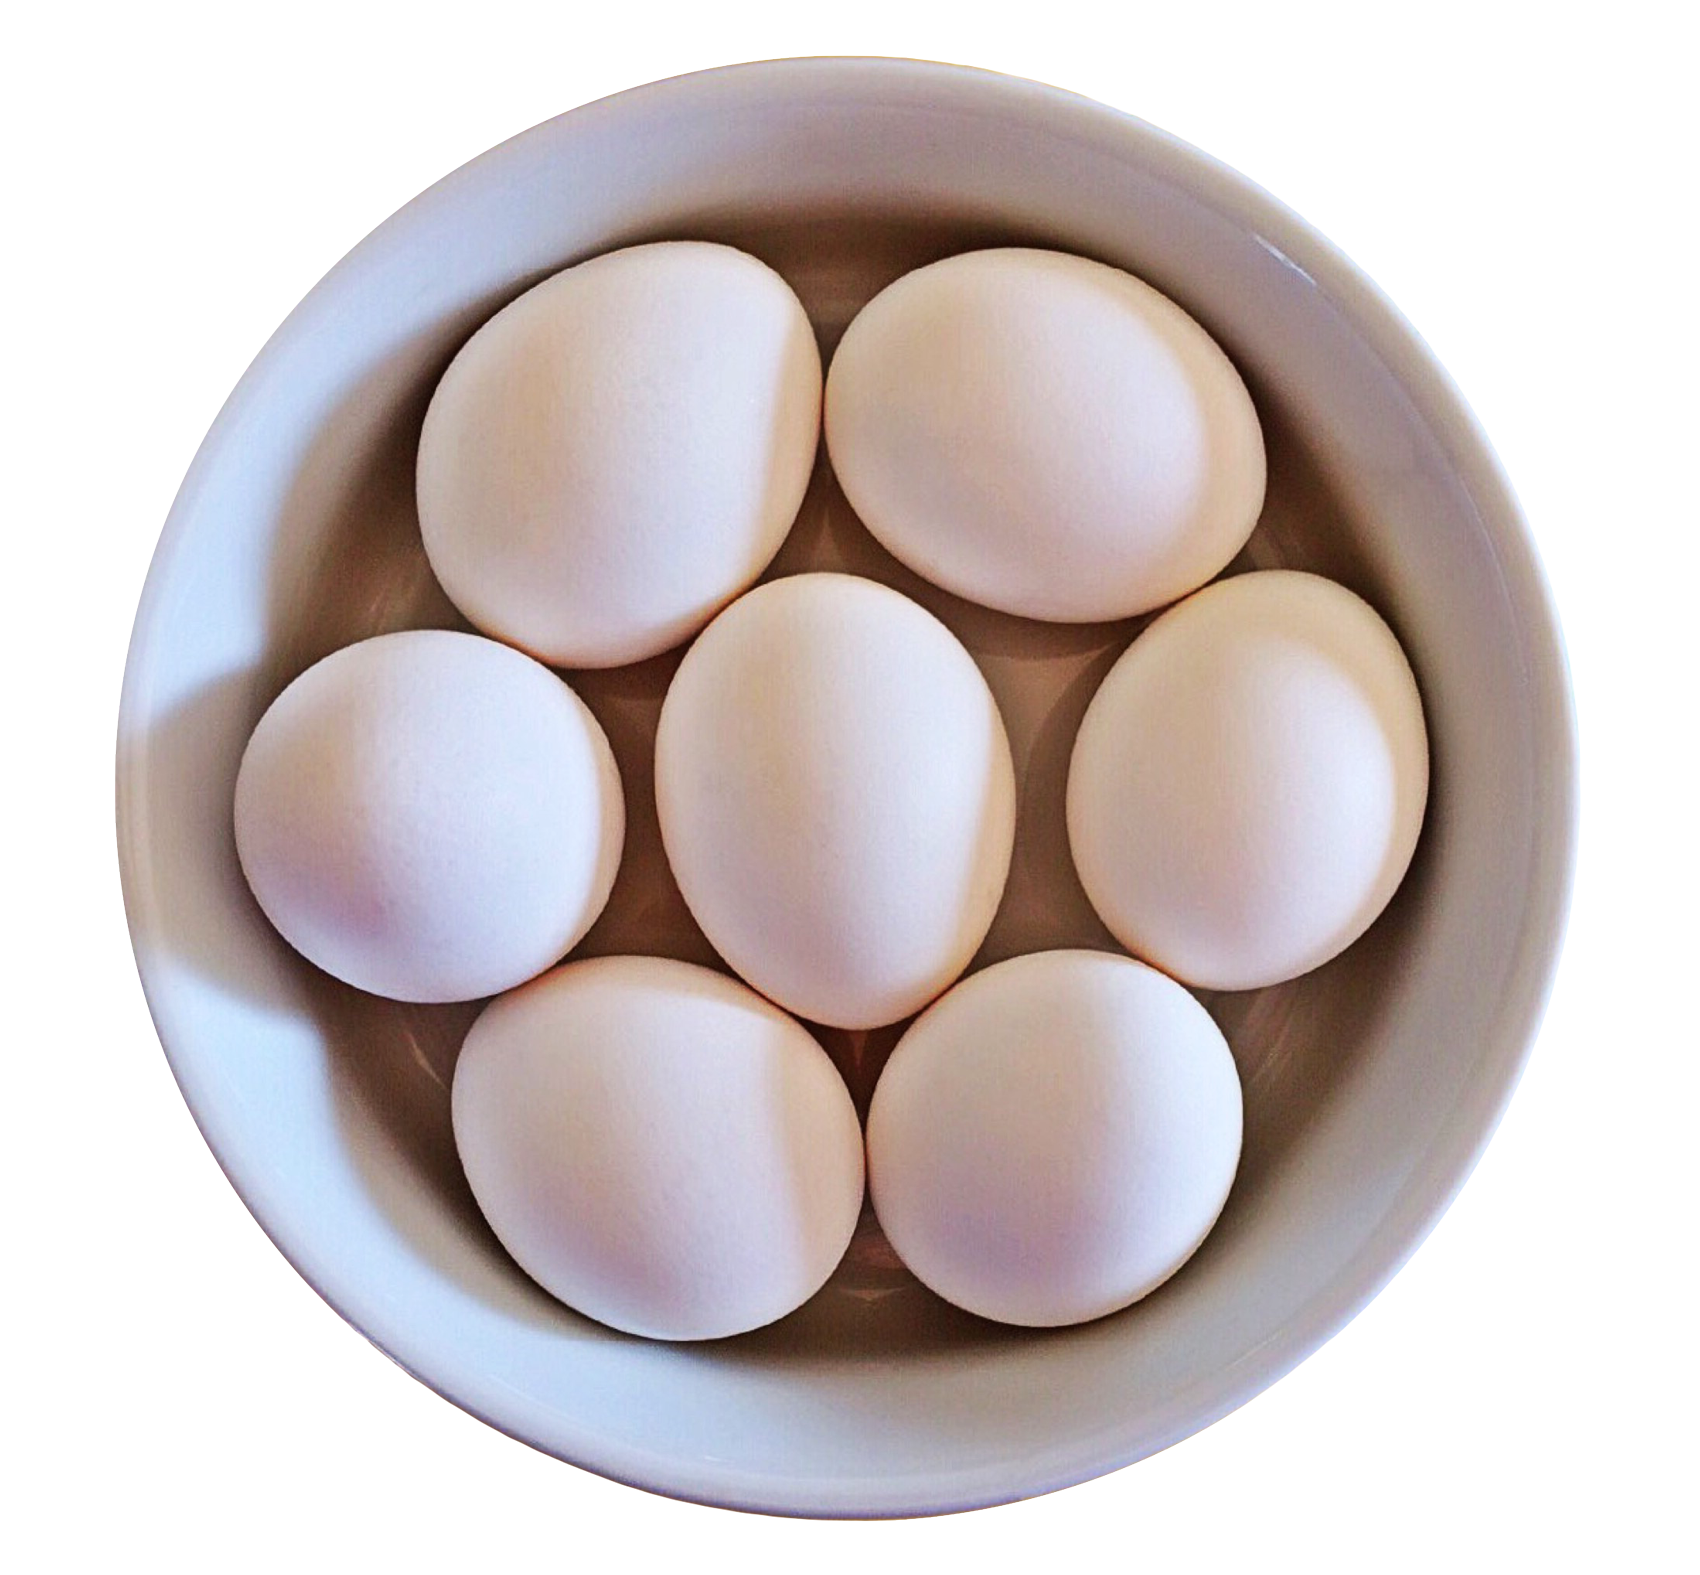 Eggs In Bowl PNG Image